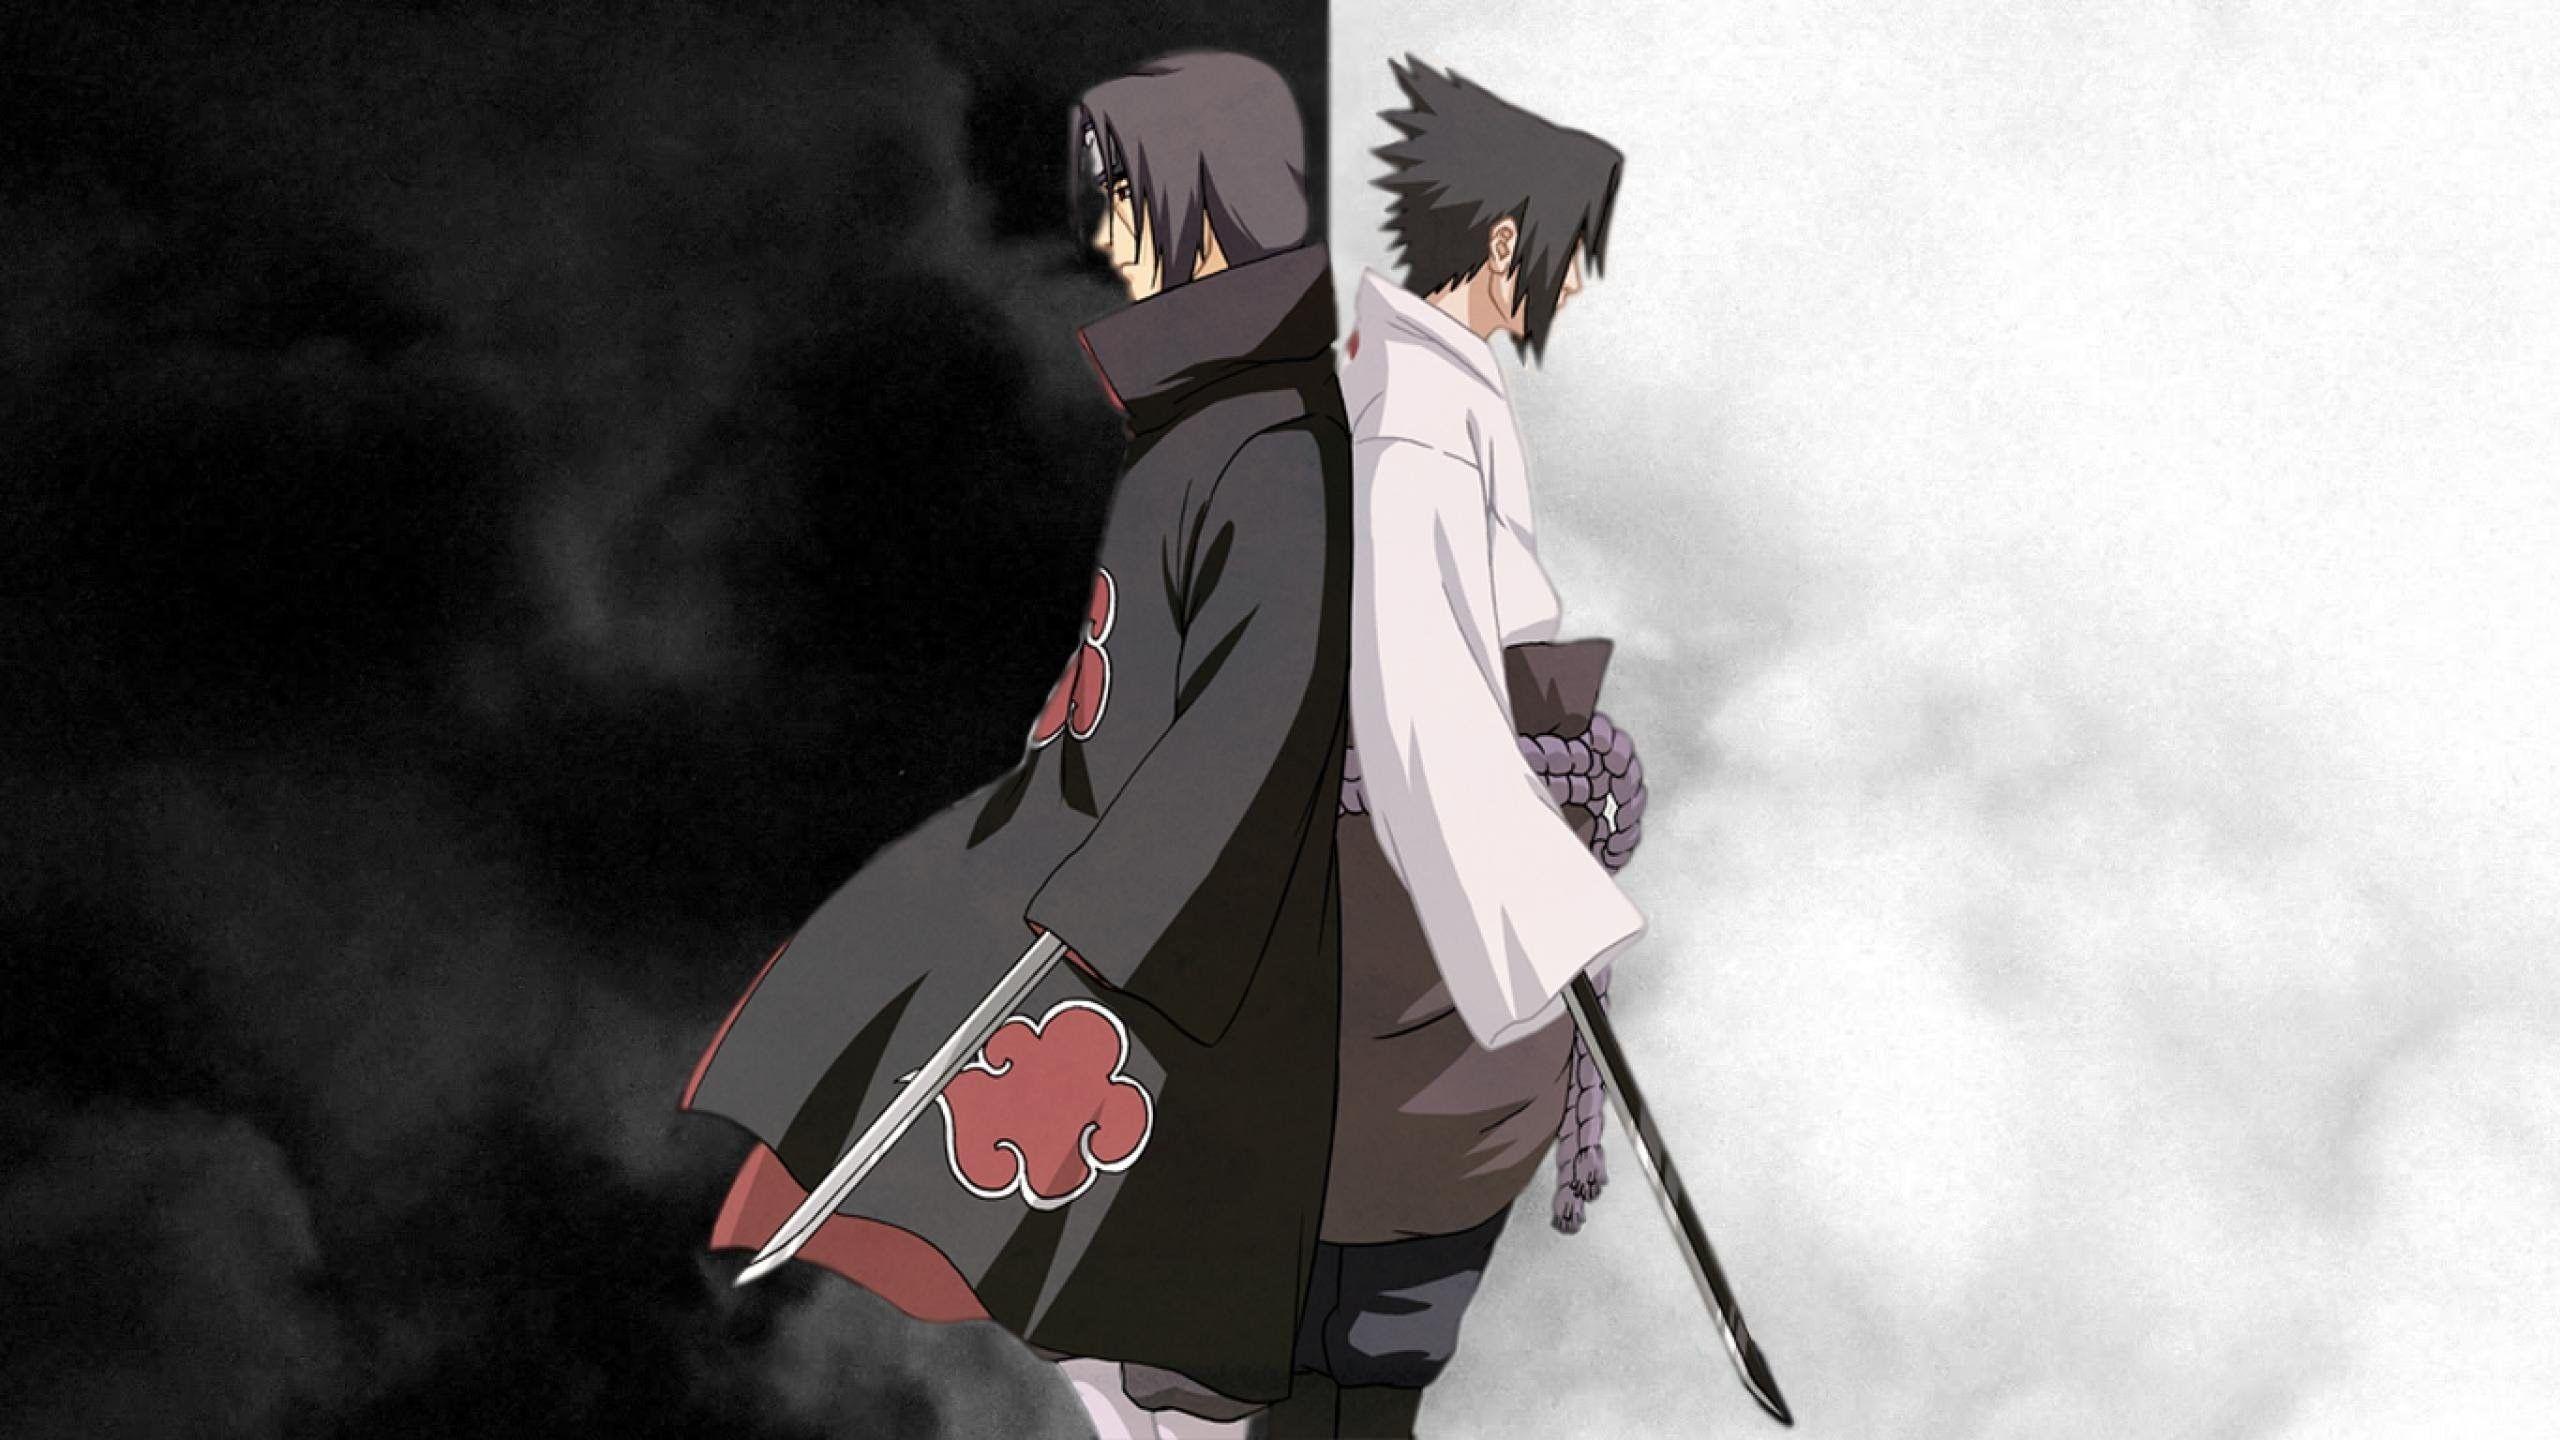 Wallpaper horror brothers Sasuke Naruto the fight Uchiha Itachi the  end of the road Naruto shippuuden blood on his hands images for desktop  section сёнэн  download